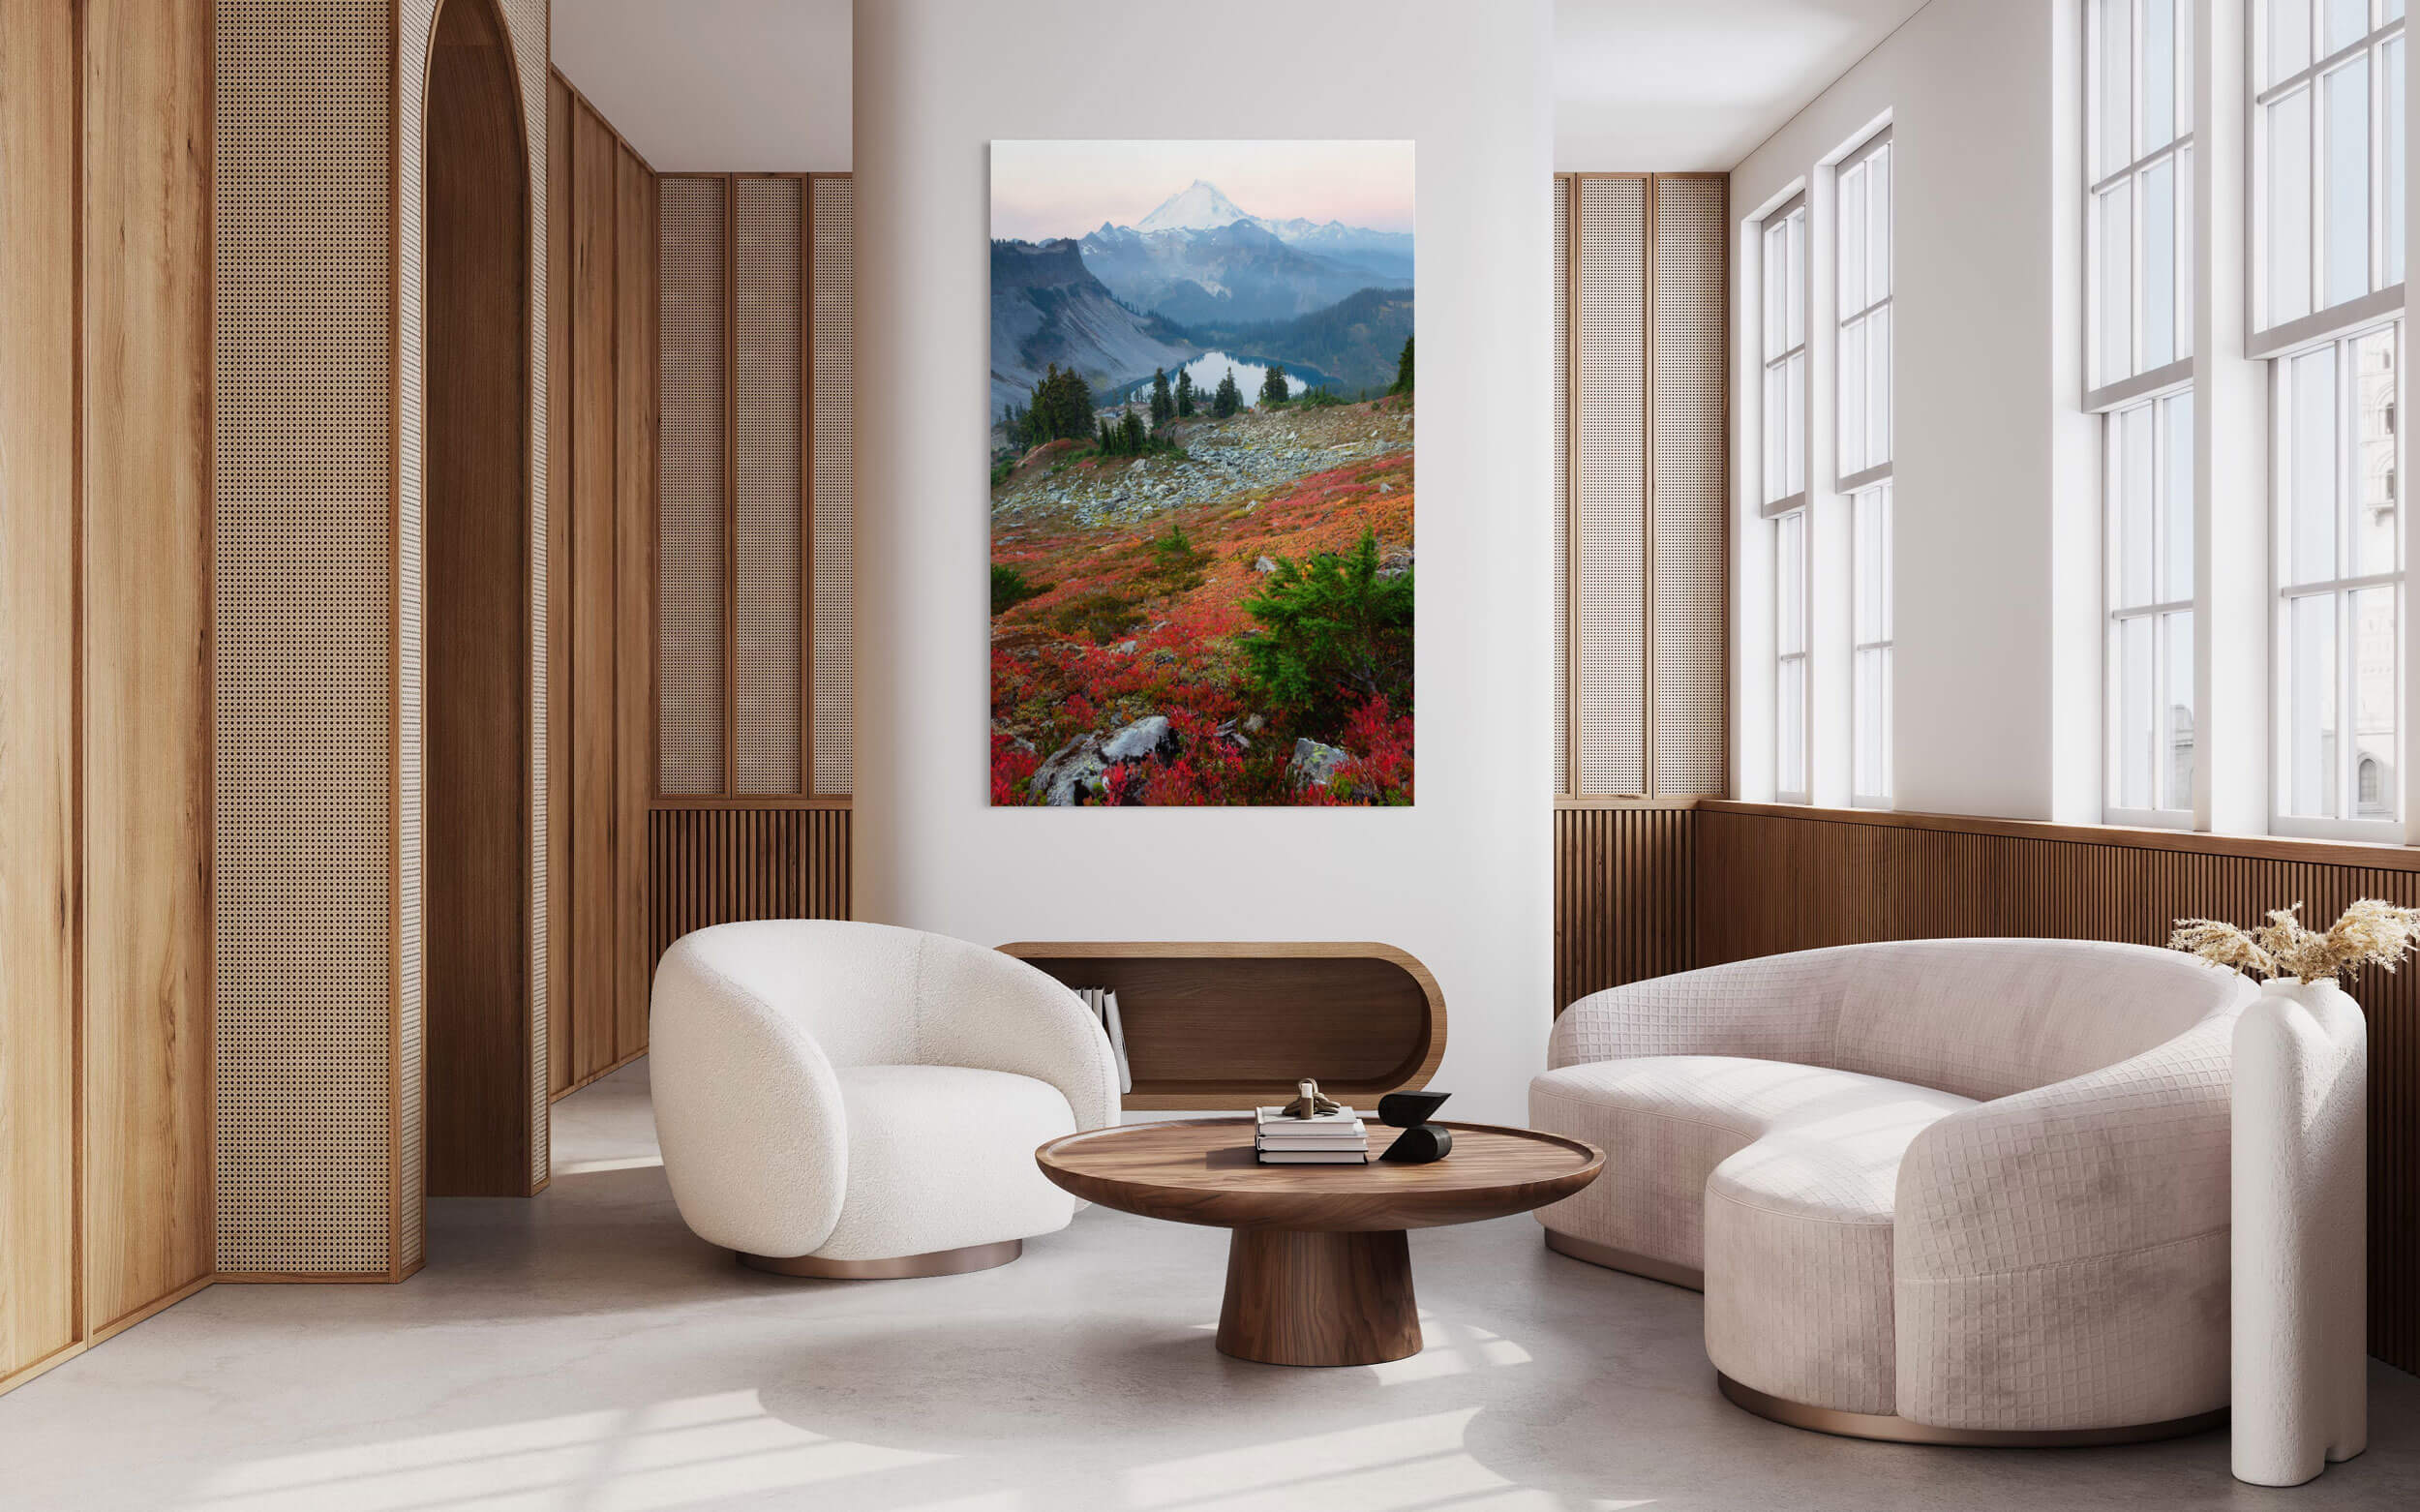 A Mount Baker fall picture from the Chain Lakes hike hangs in a living room.